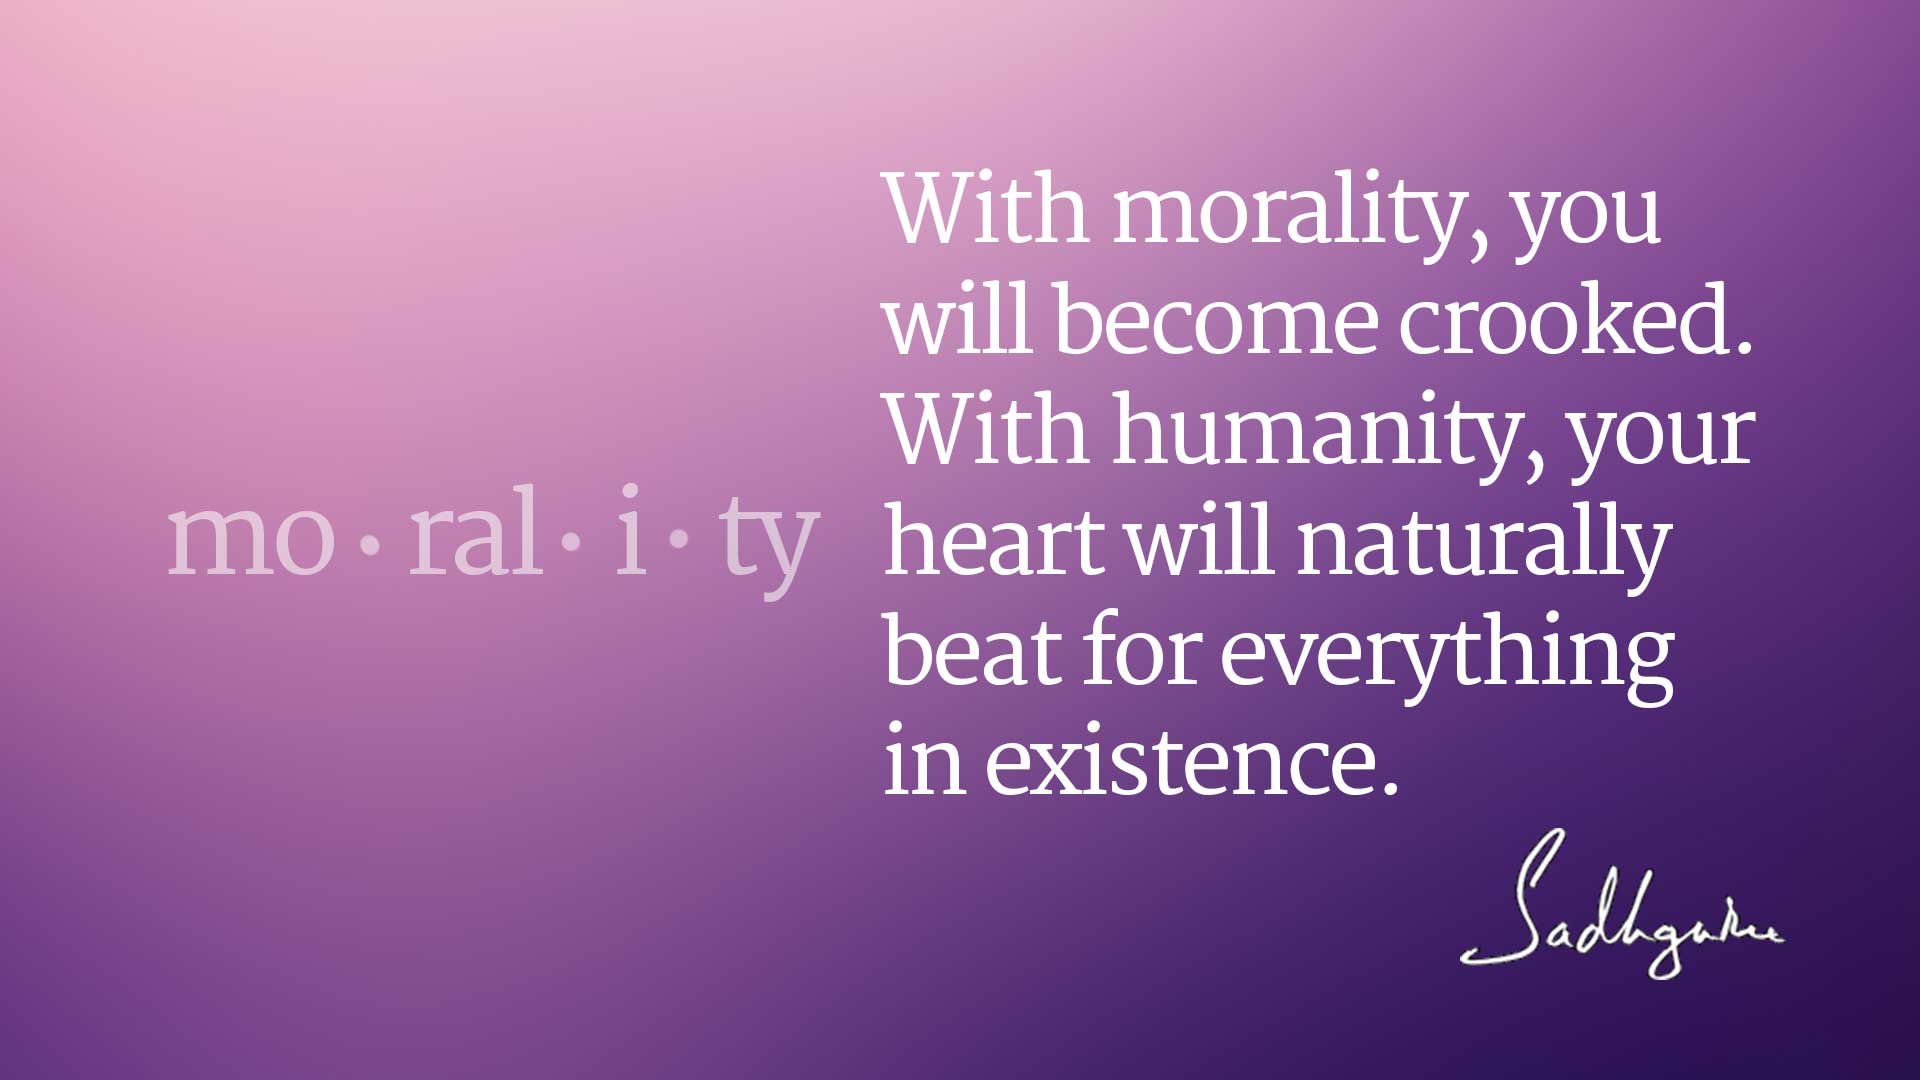 With morality, you will become crooked. With humanity, your heart will naturally beat for everything in existence